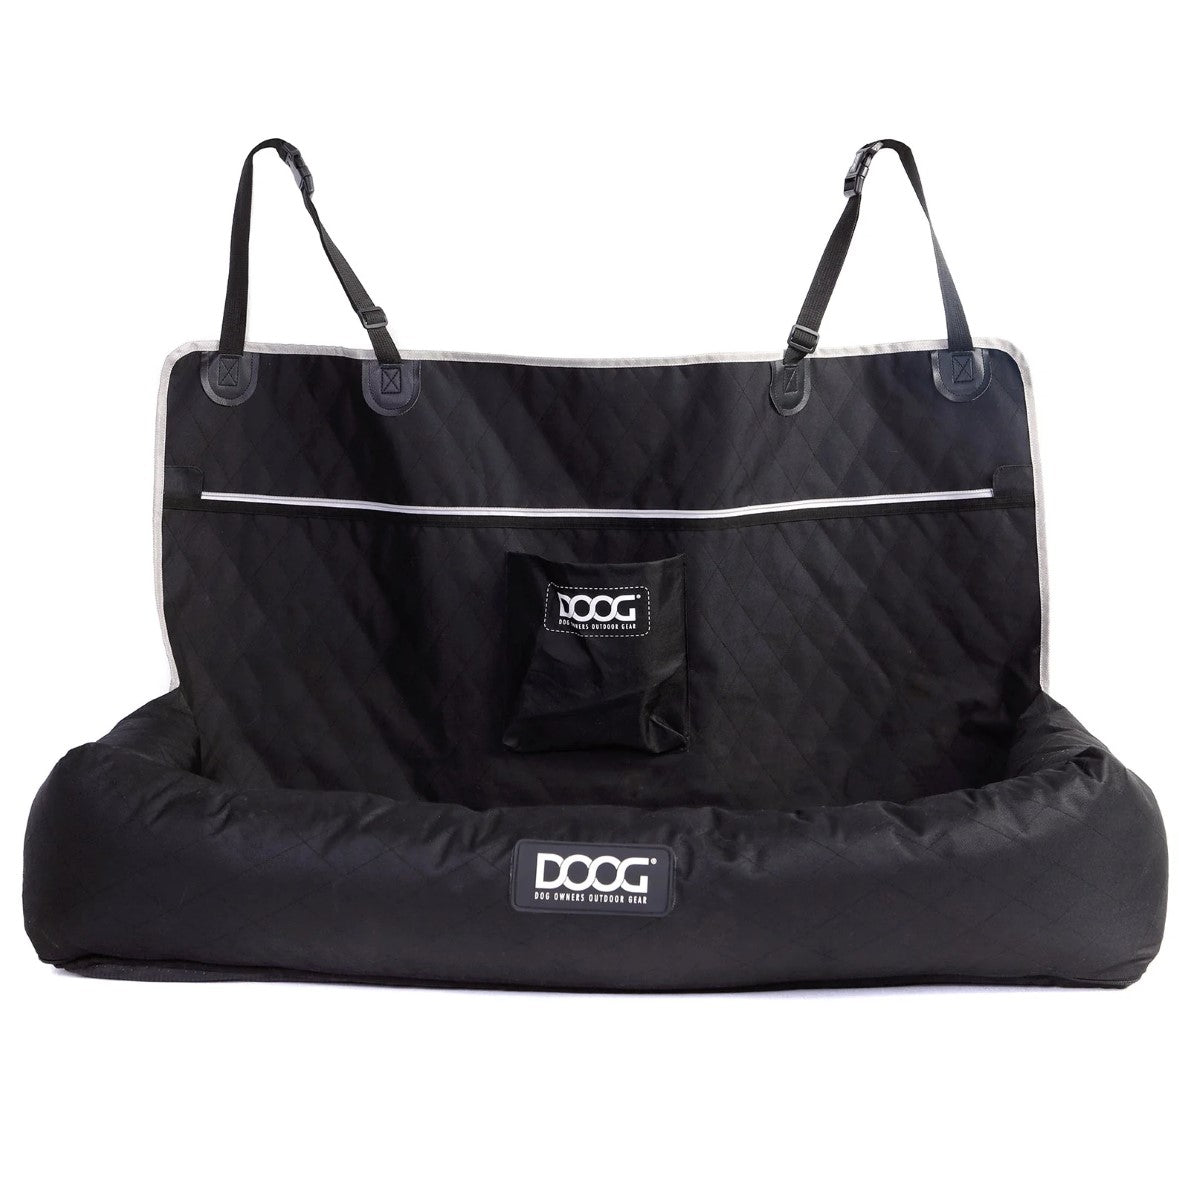 DOOG Pet Car Seat - Helps Anxiety and Motion Sickness